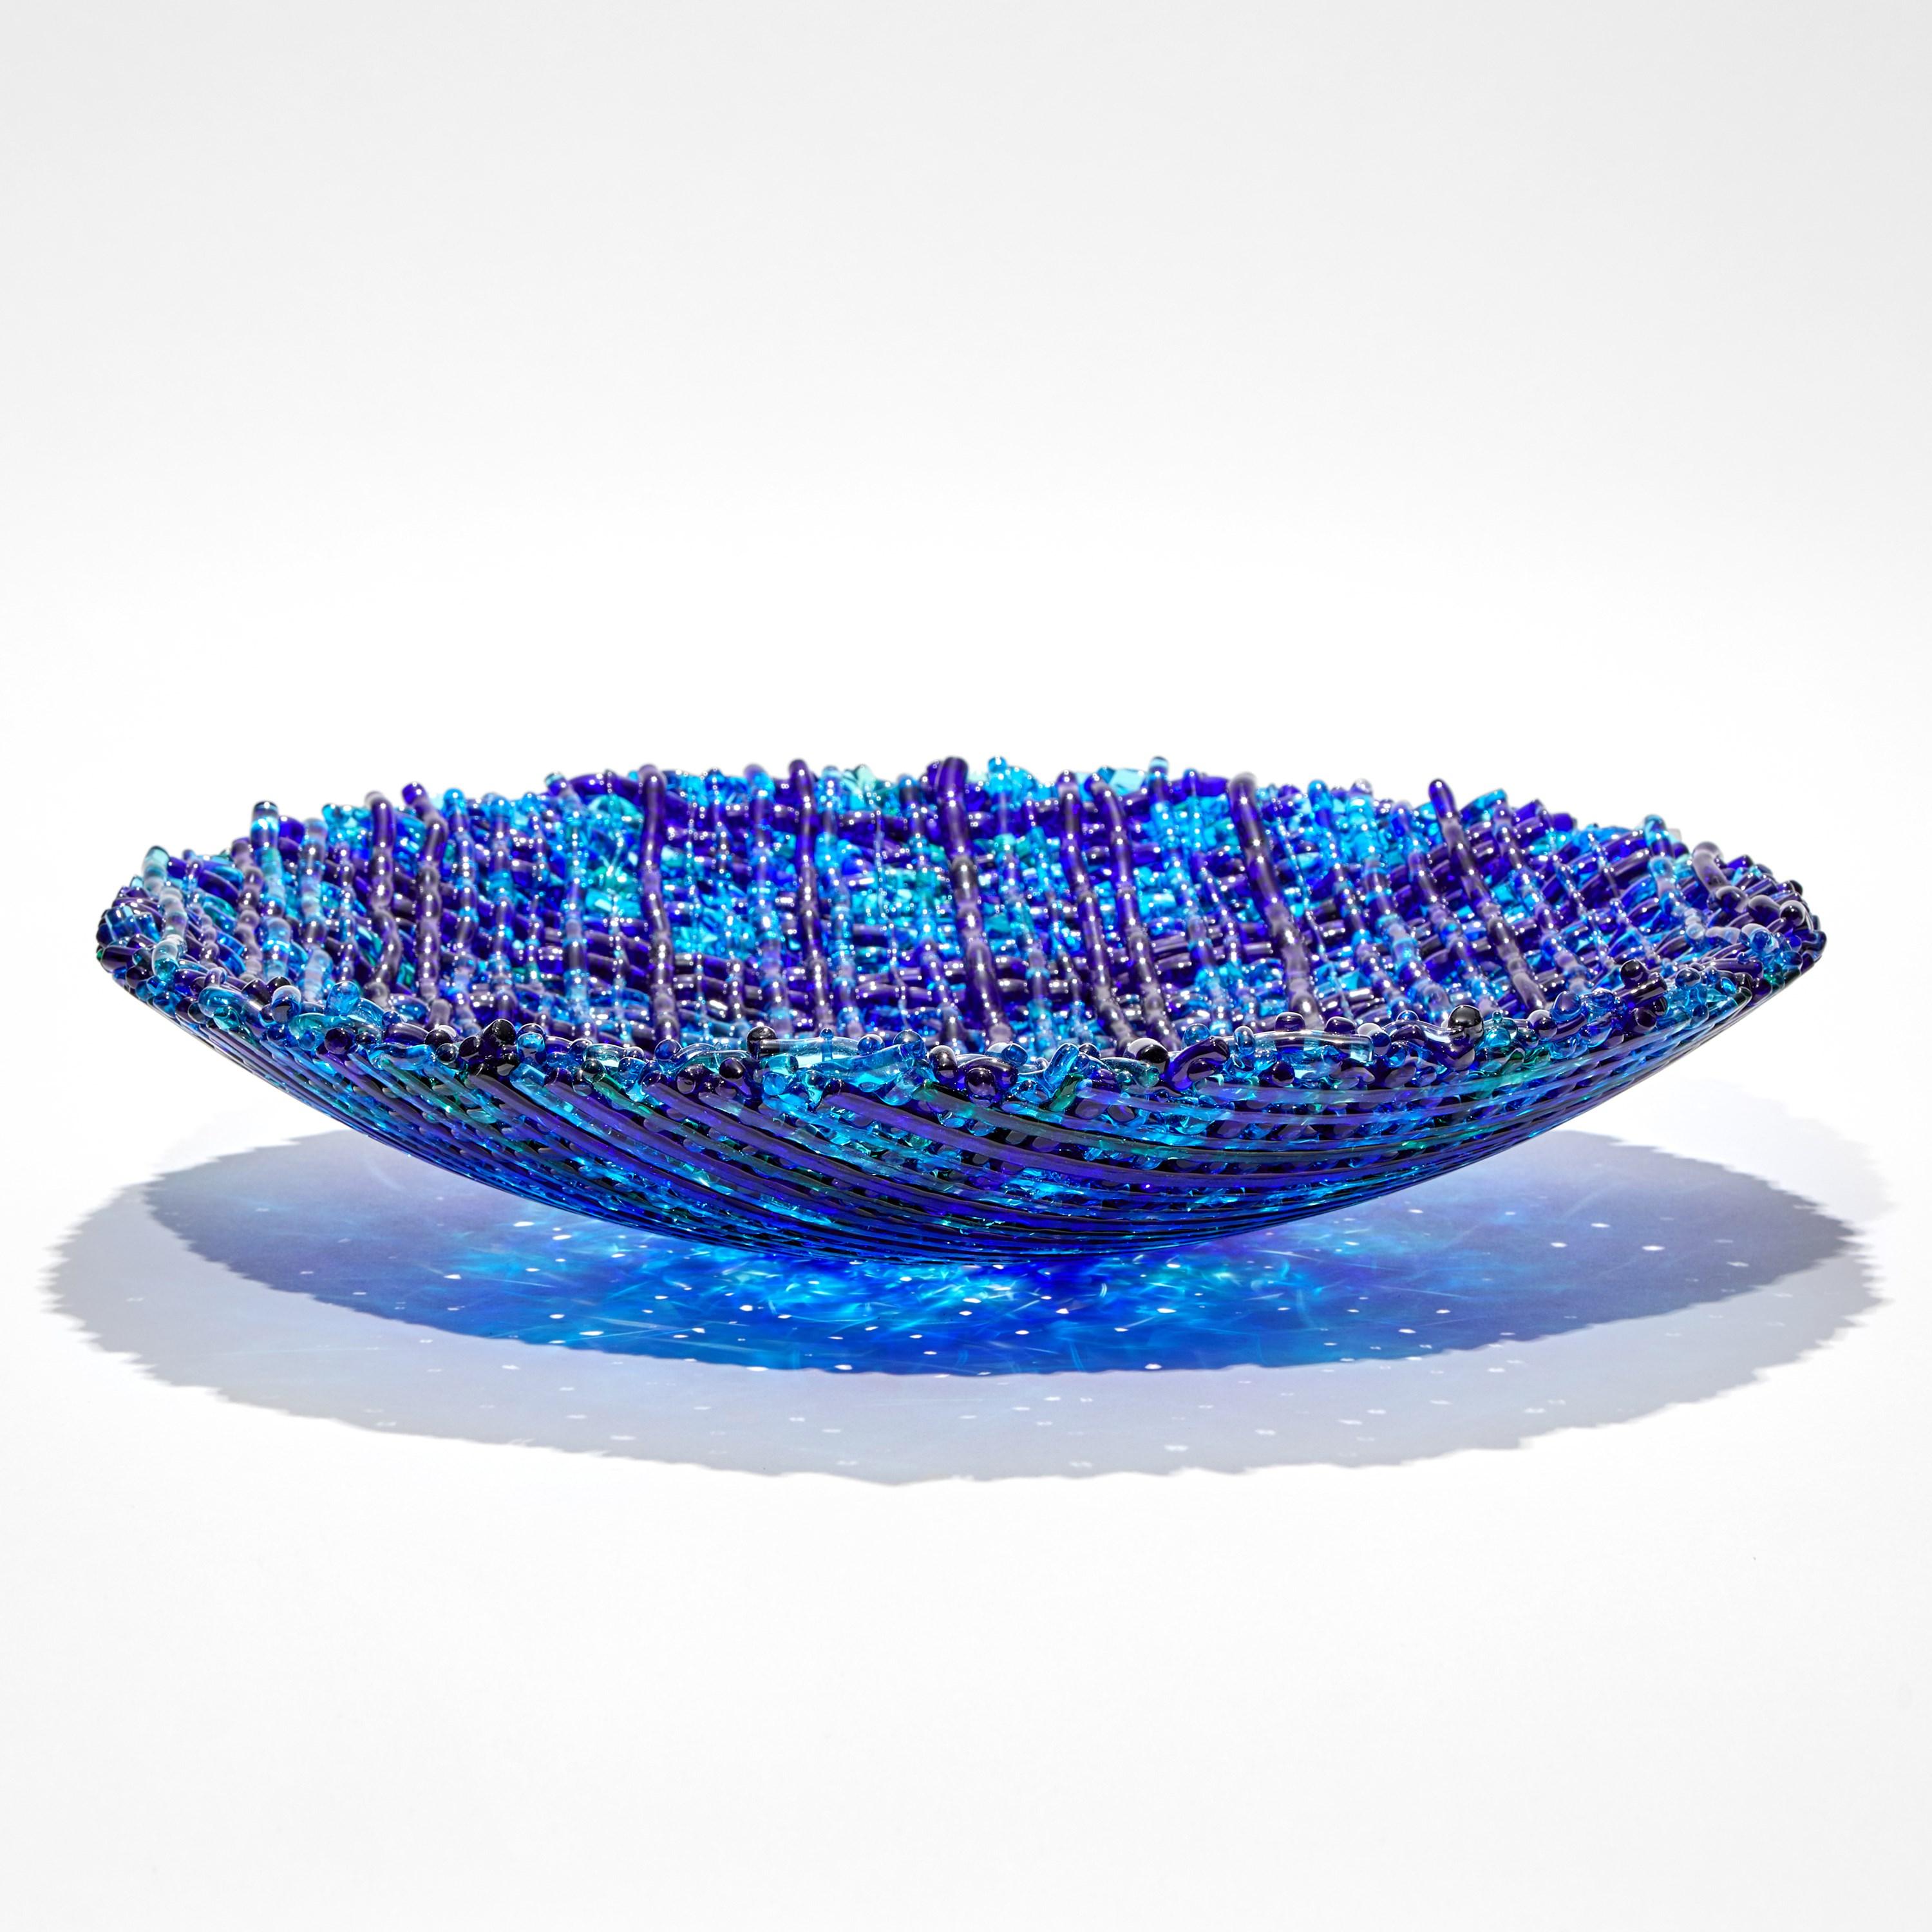 Organic Modern Blue Topography, a Woven Glass Sculptural Centrepiece by Cathryn Shilling